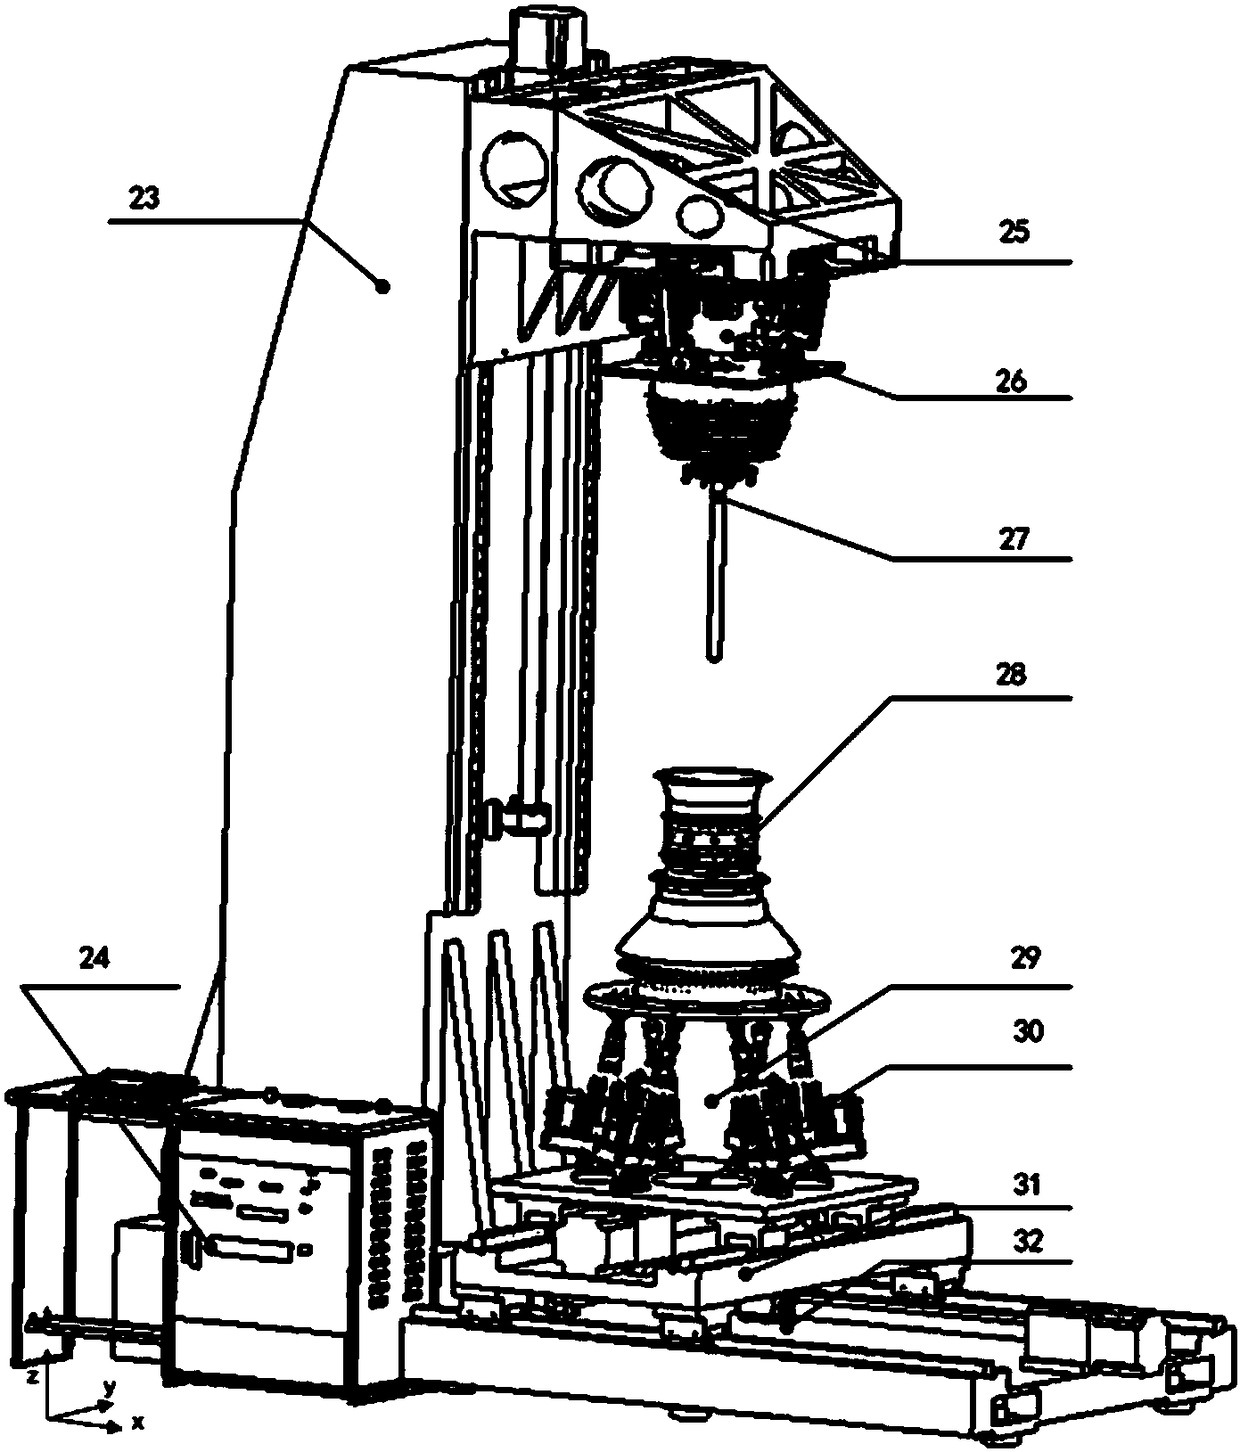 Vertical assembly equipment for shaft assembly of components